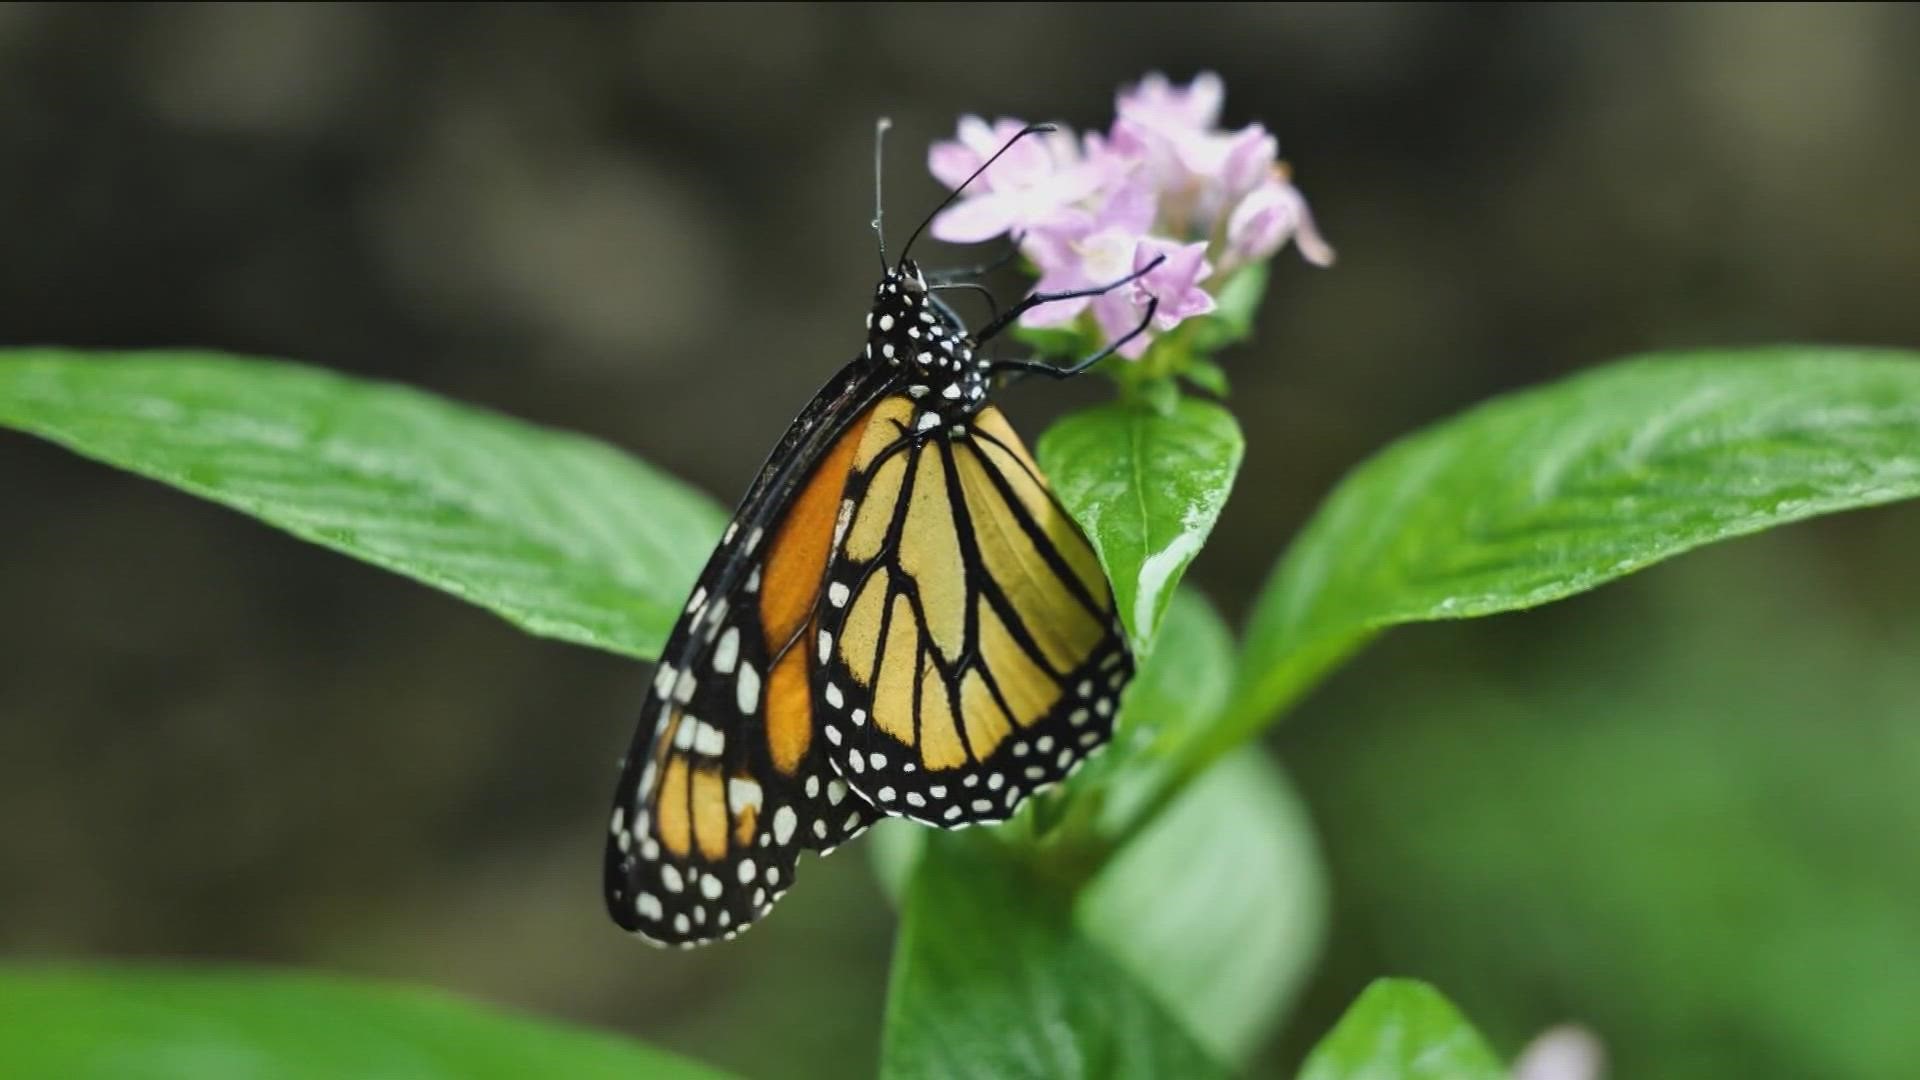 The International Monarch Monitoring Blitz asks people in Canada, the U.S. and Mexico to look for monarchs in various stages and log their observations for 10 days.